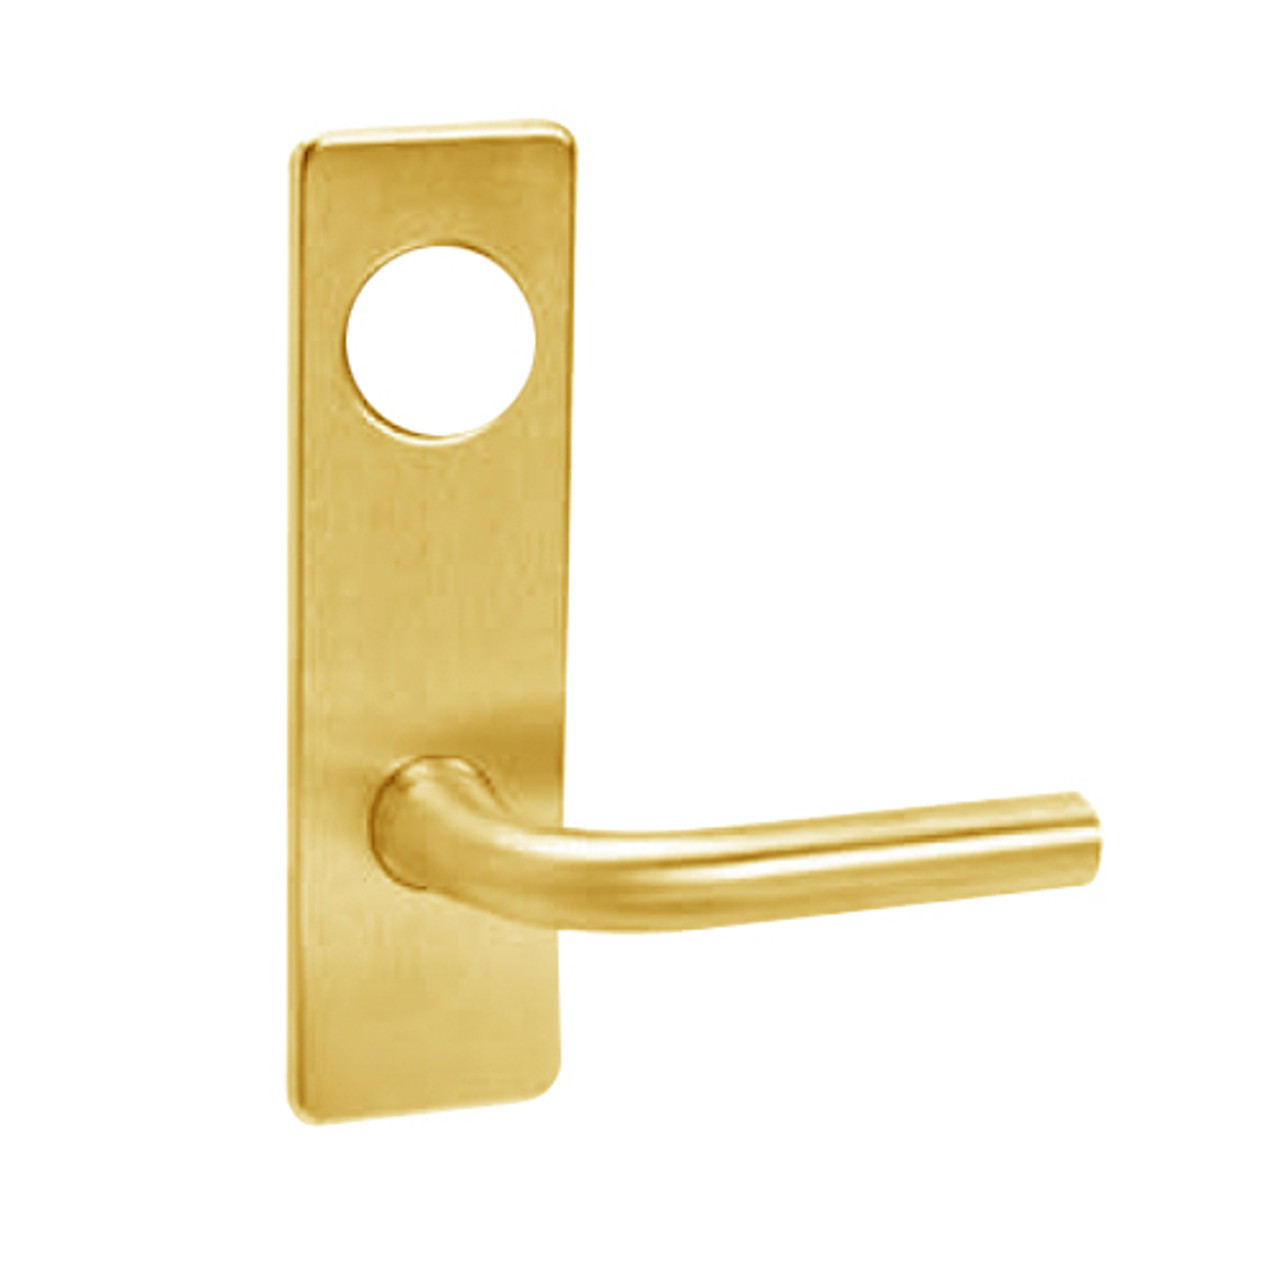 ML2069-RSM-605-CL6 Corbin Russwin ML2000 Series IC 6-Pin Less Core Mortise Institution Privacy Locksets with Regis Lever in Bright Brass